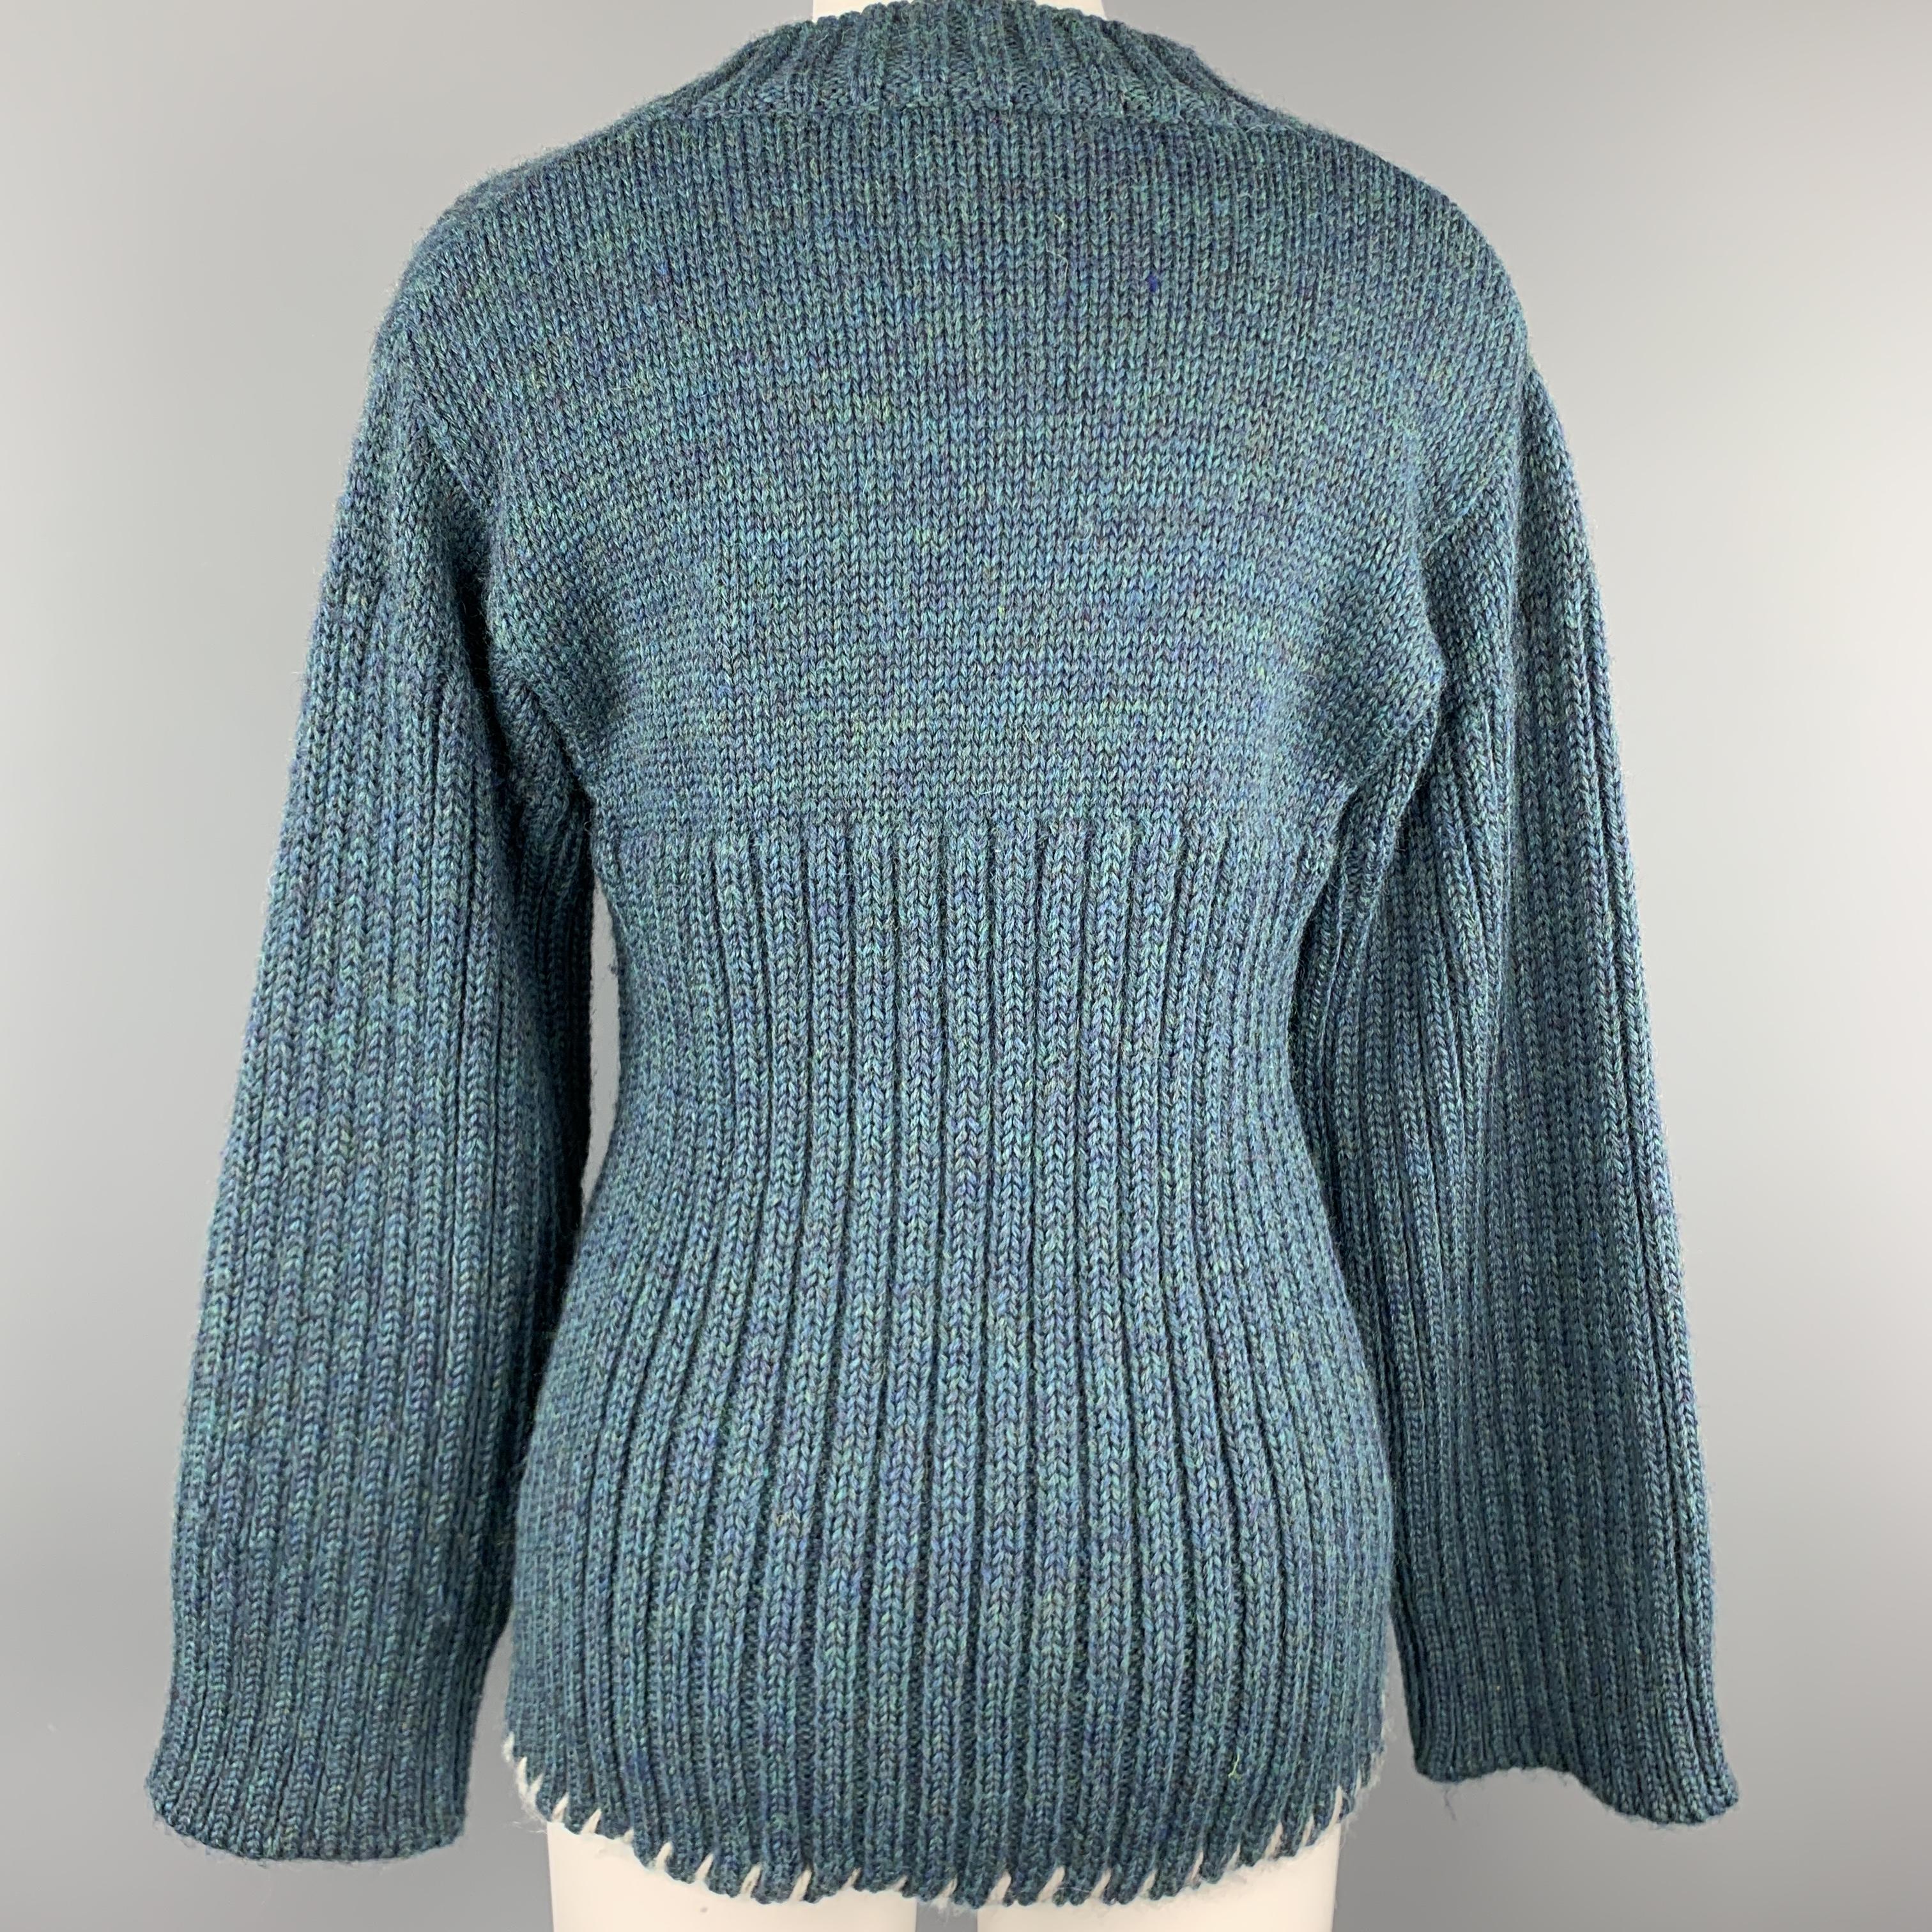 Women's COMME des GARCONS SHIRT S Teal Heathered Blue Wool Ribbed Stitch Sweater